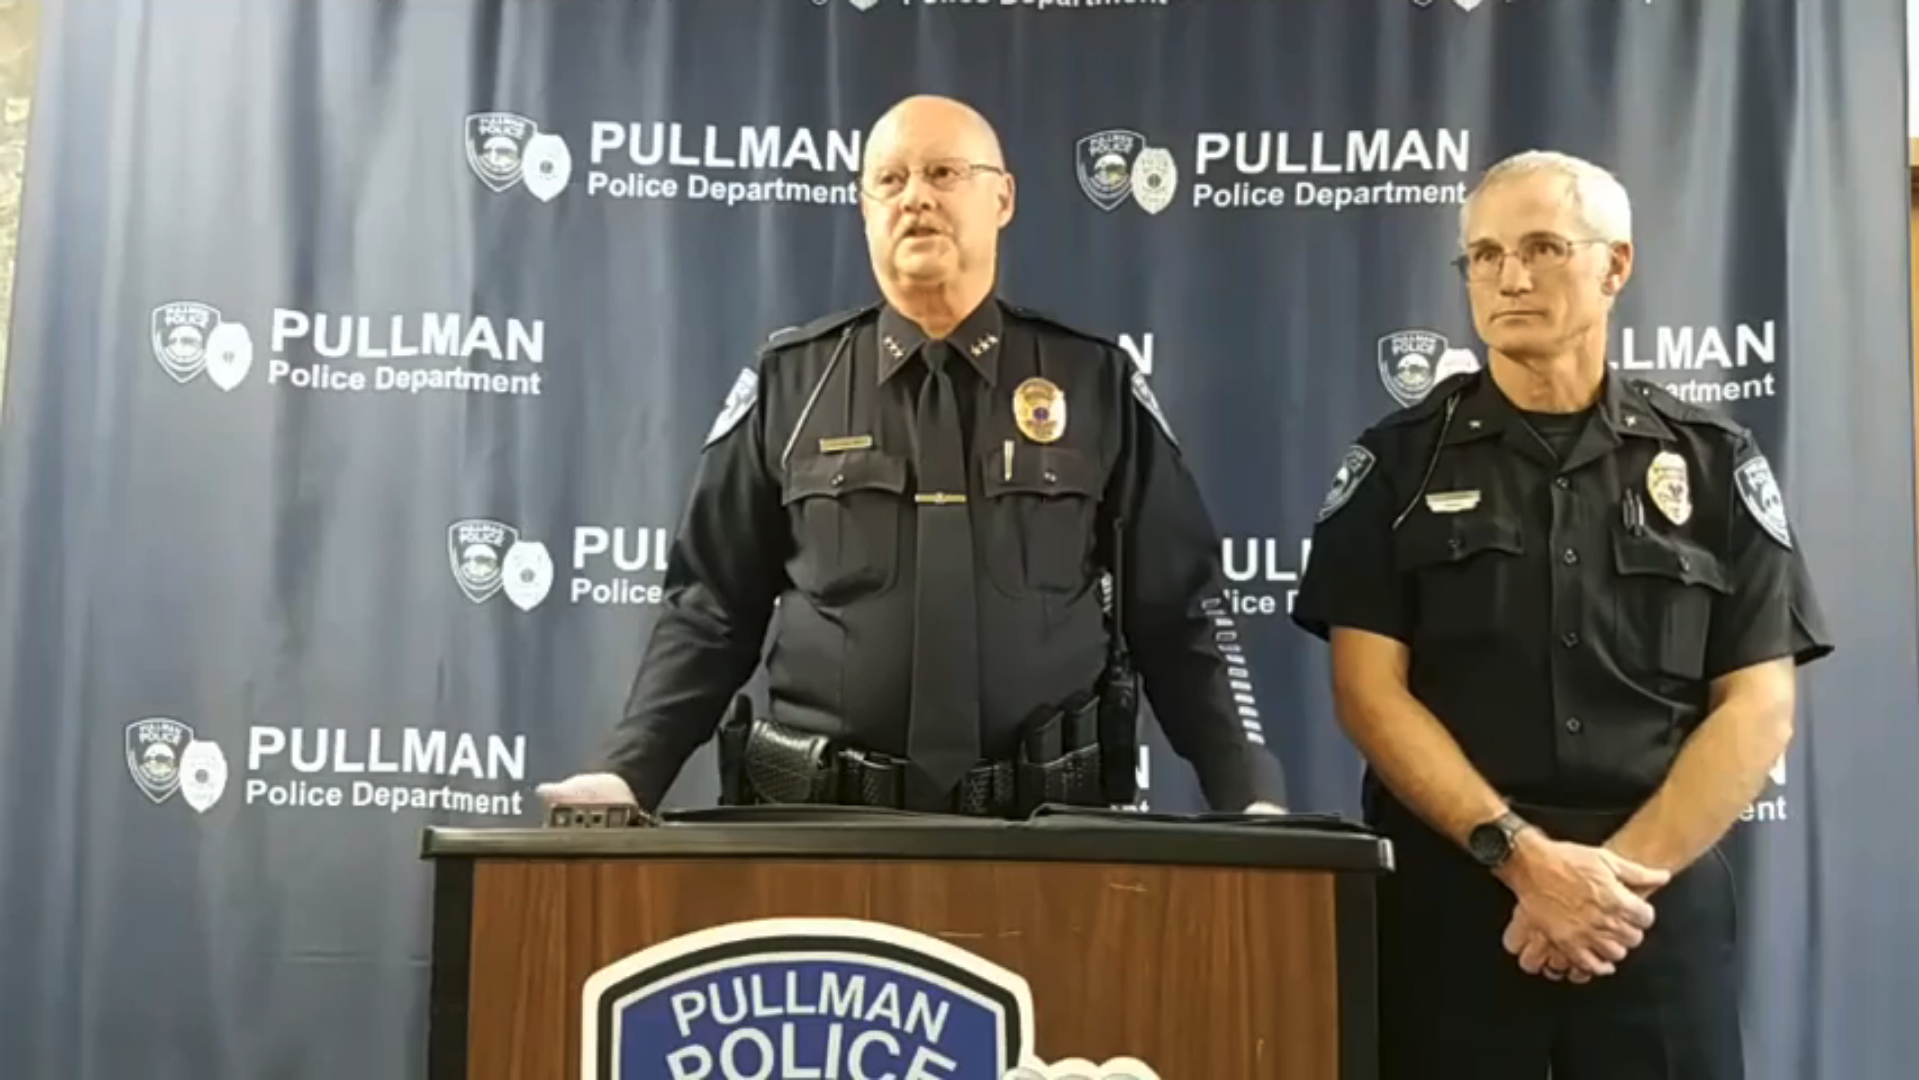 Pullman police sergeant charged with sexual misconduct after WSU